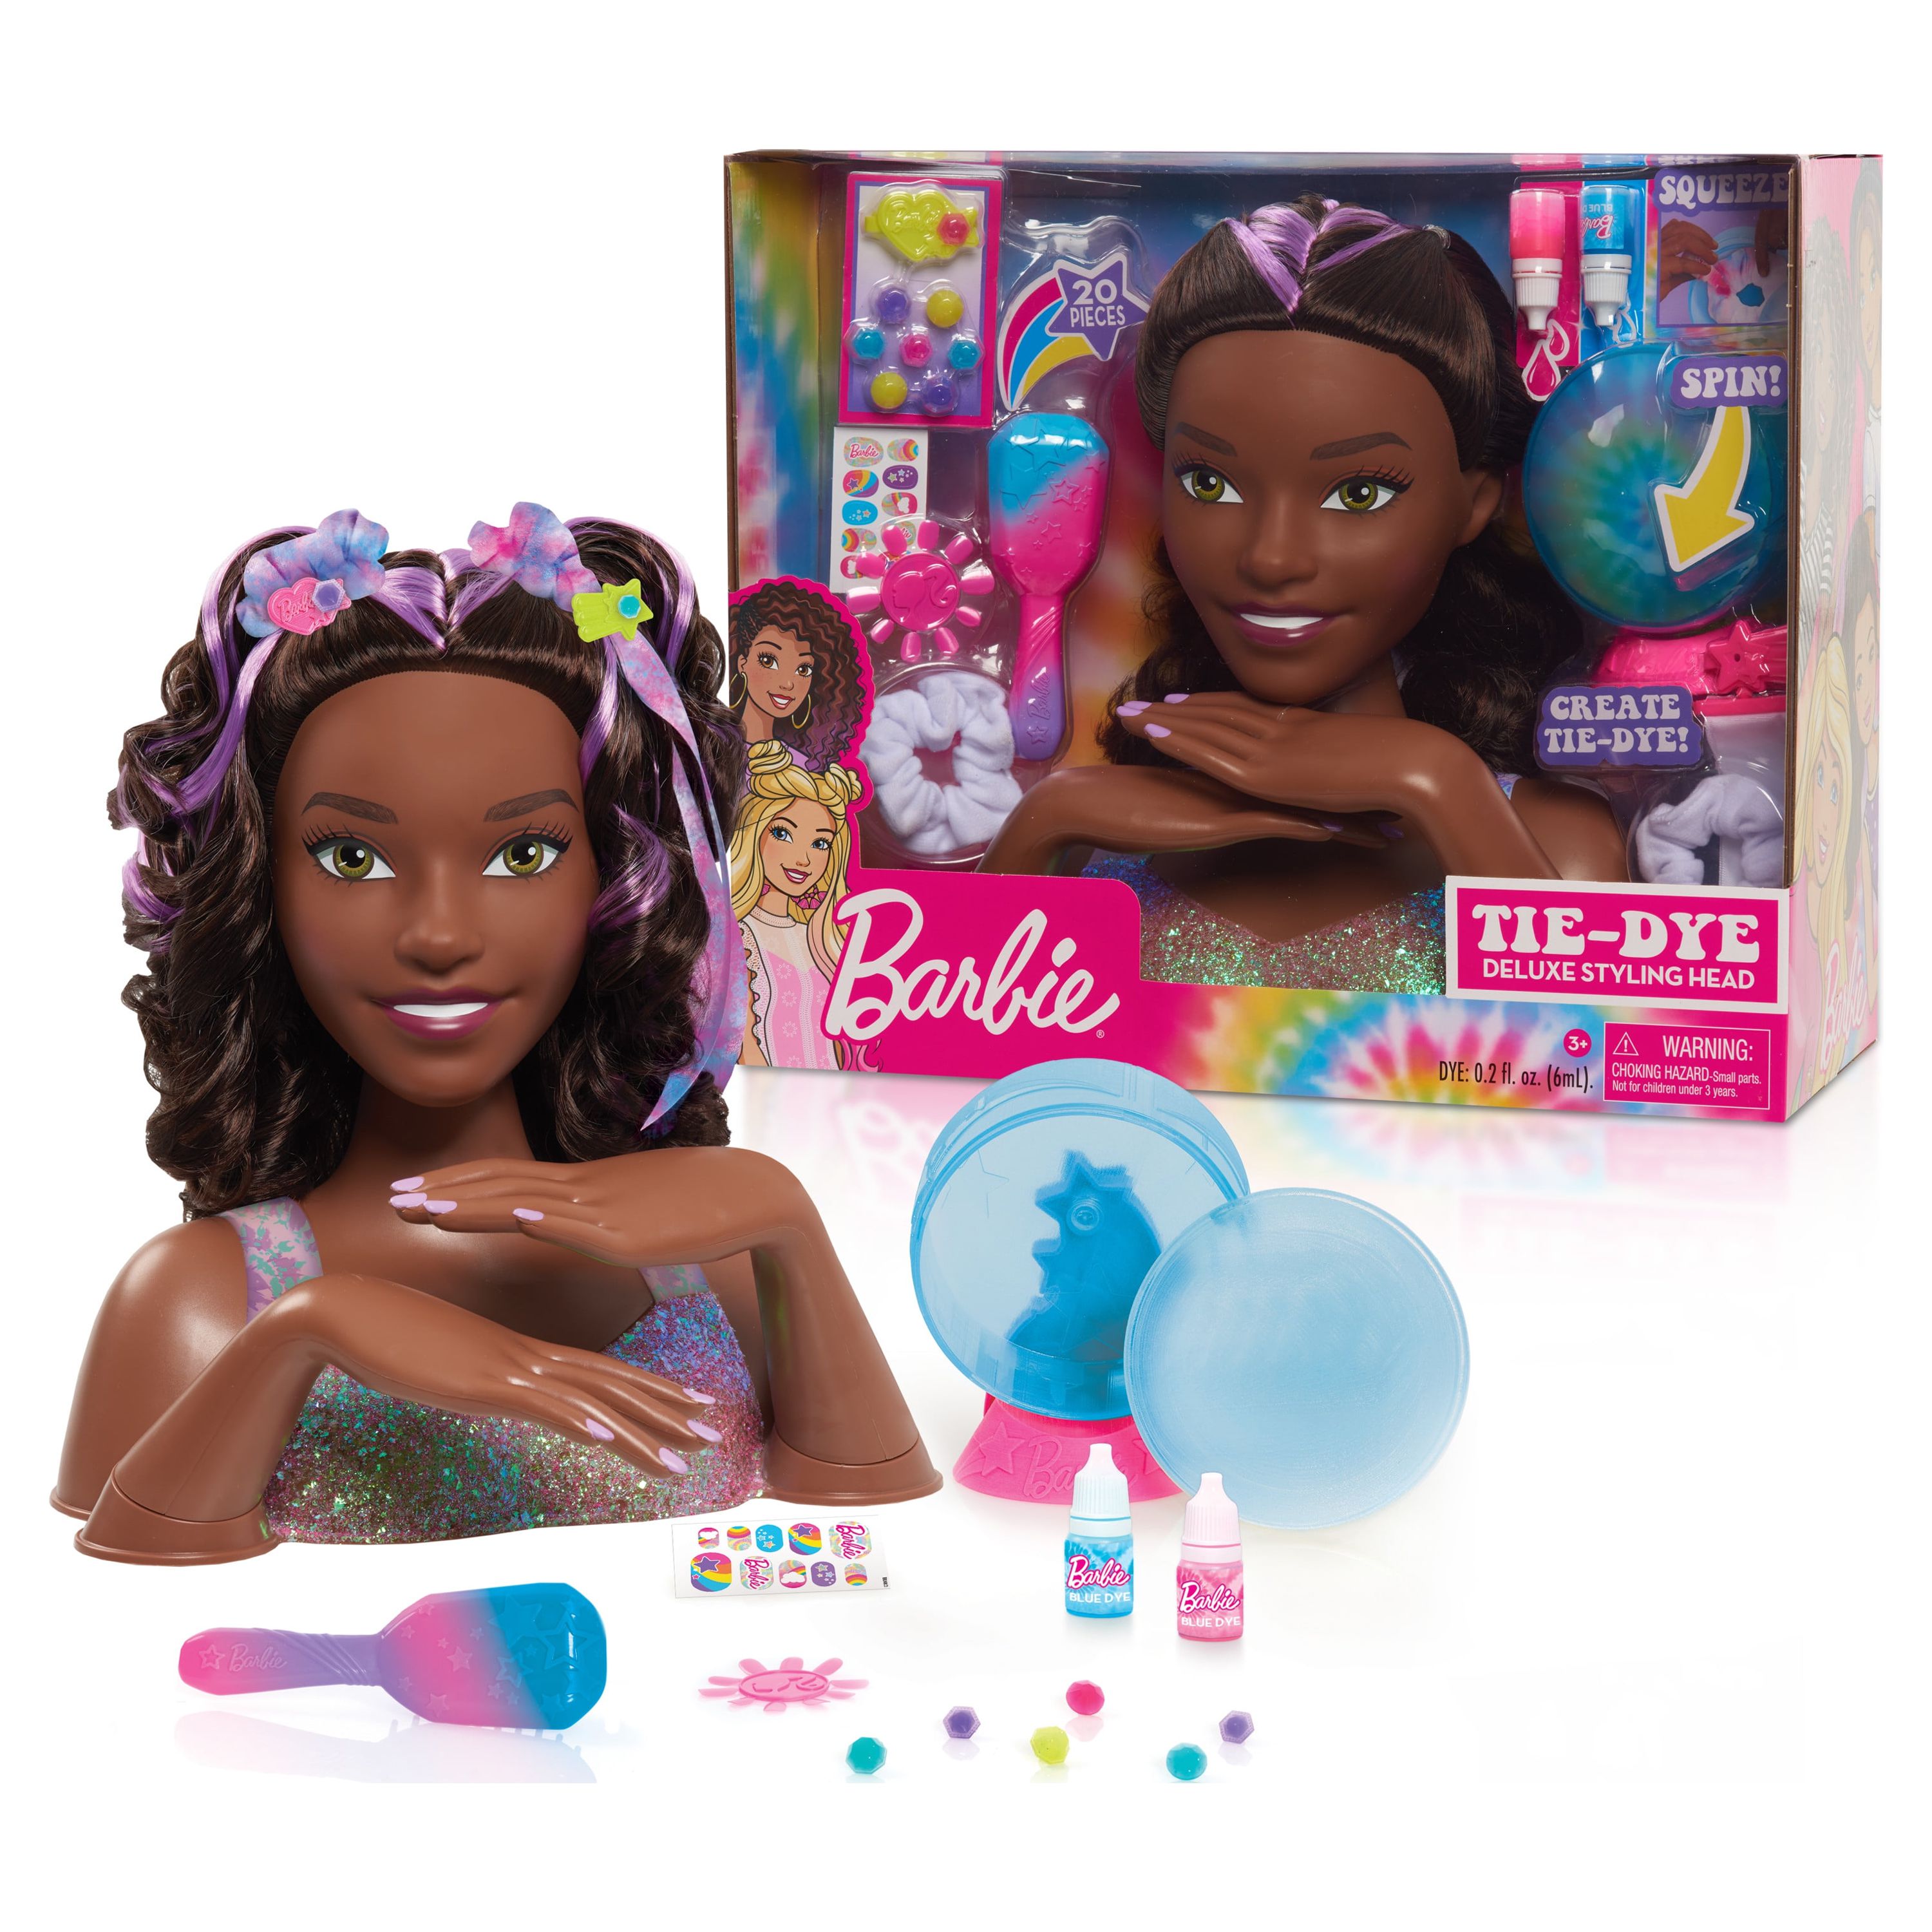 Barbie Tie-Dye Deluxe 21-Piece Styling Head, Black Hair, Includes 2 Non-Toxic Dye Colors,  Kids Toys for Ages 3 Up, Gifts and Presents - image 1 of 9